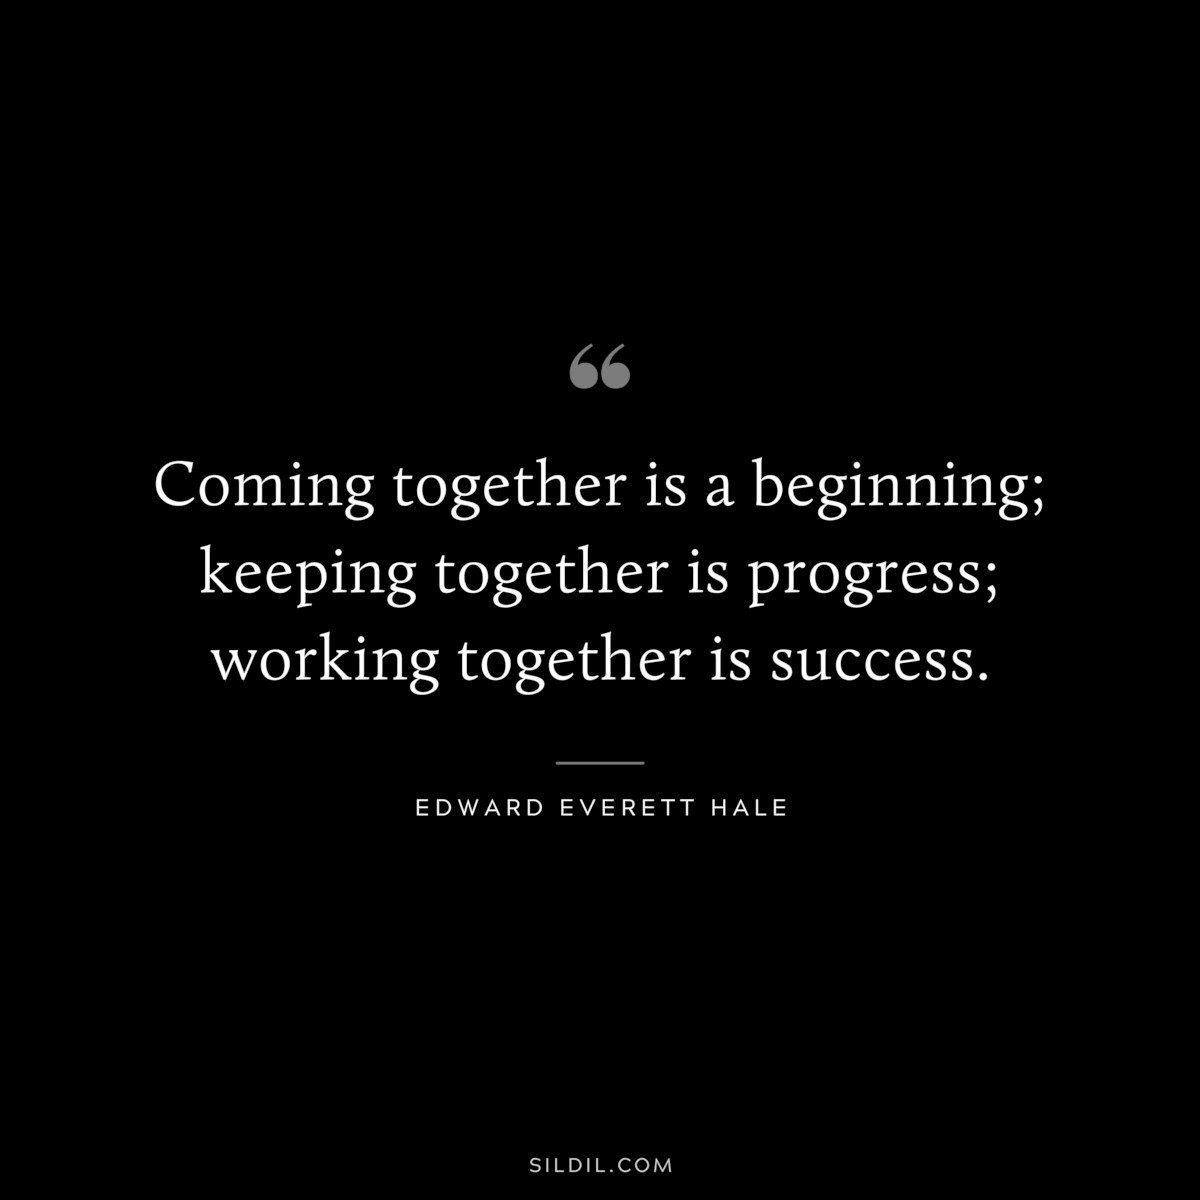 Coming together is a beginning; keeping together is progress; working together is success. ― Edward Everett Hale